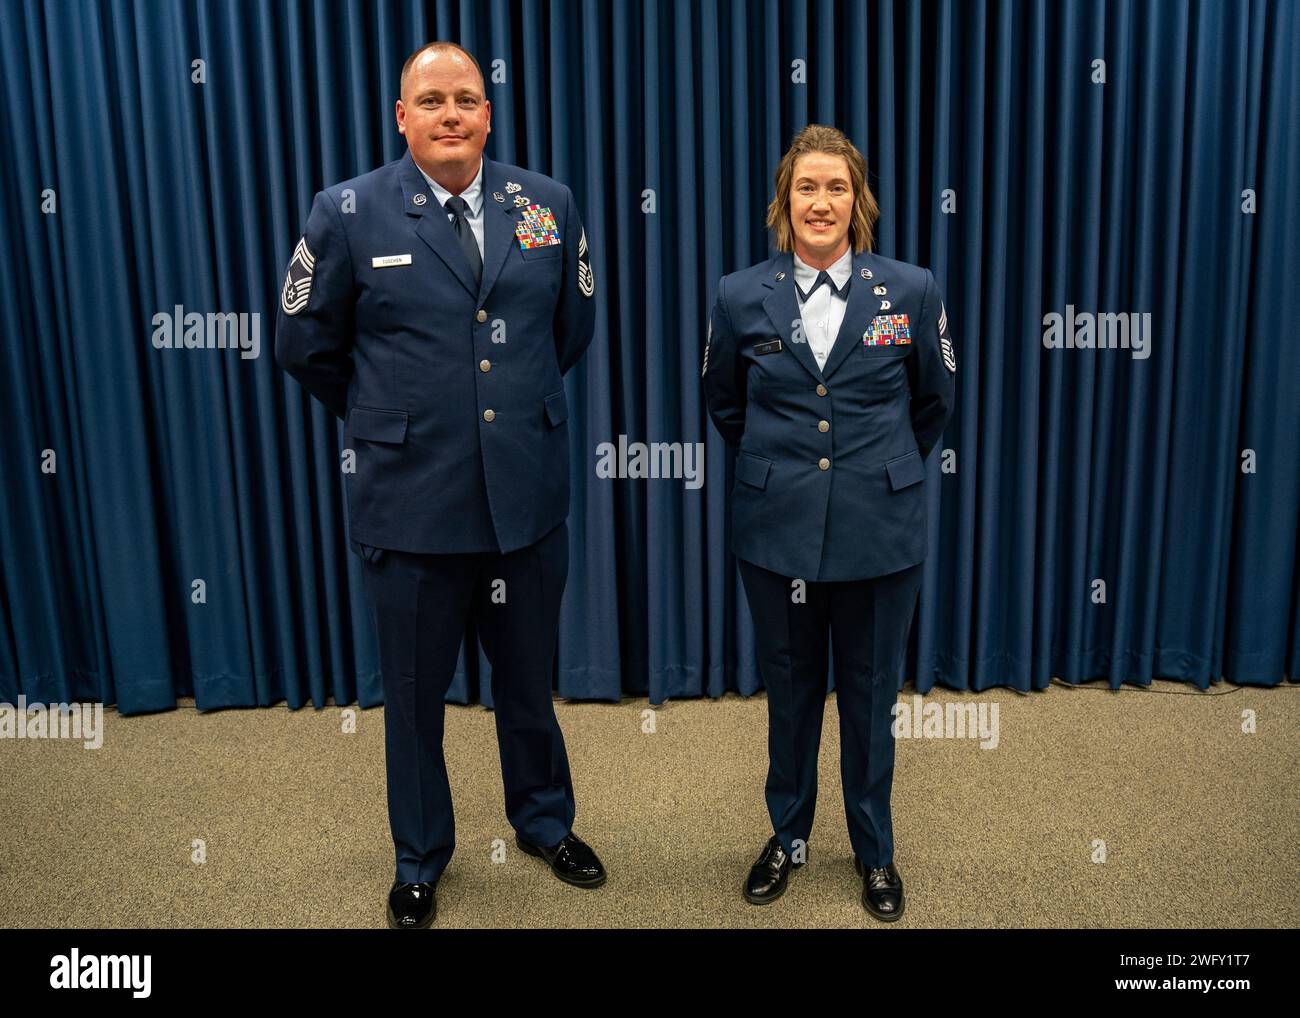 Chief Master Sgt. Alan Tuschen (left), Wing installation manager with the 114th Civil Engineer Squadron, and Chief Master Sgt. Kristy Loen, superintendent of the 114th Command Post, pose for a photo during a chief master sergeant induction ceremony at Joe Foss Field, South Dakota, Jan. 7, 2023.  These honorees have been inducted into the highest enlisted rank and will assume strategic leadership positions with significant influence throughout the base. Stock Photo